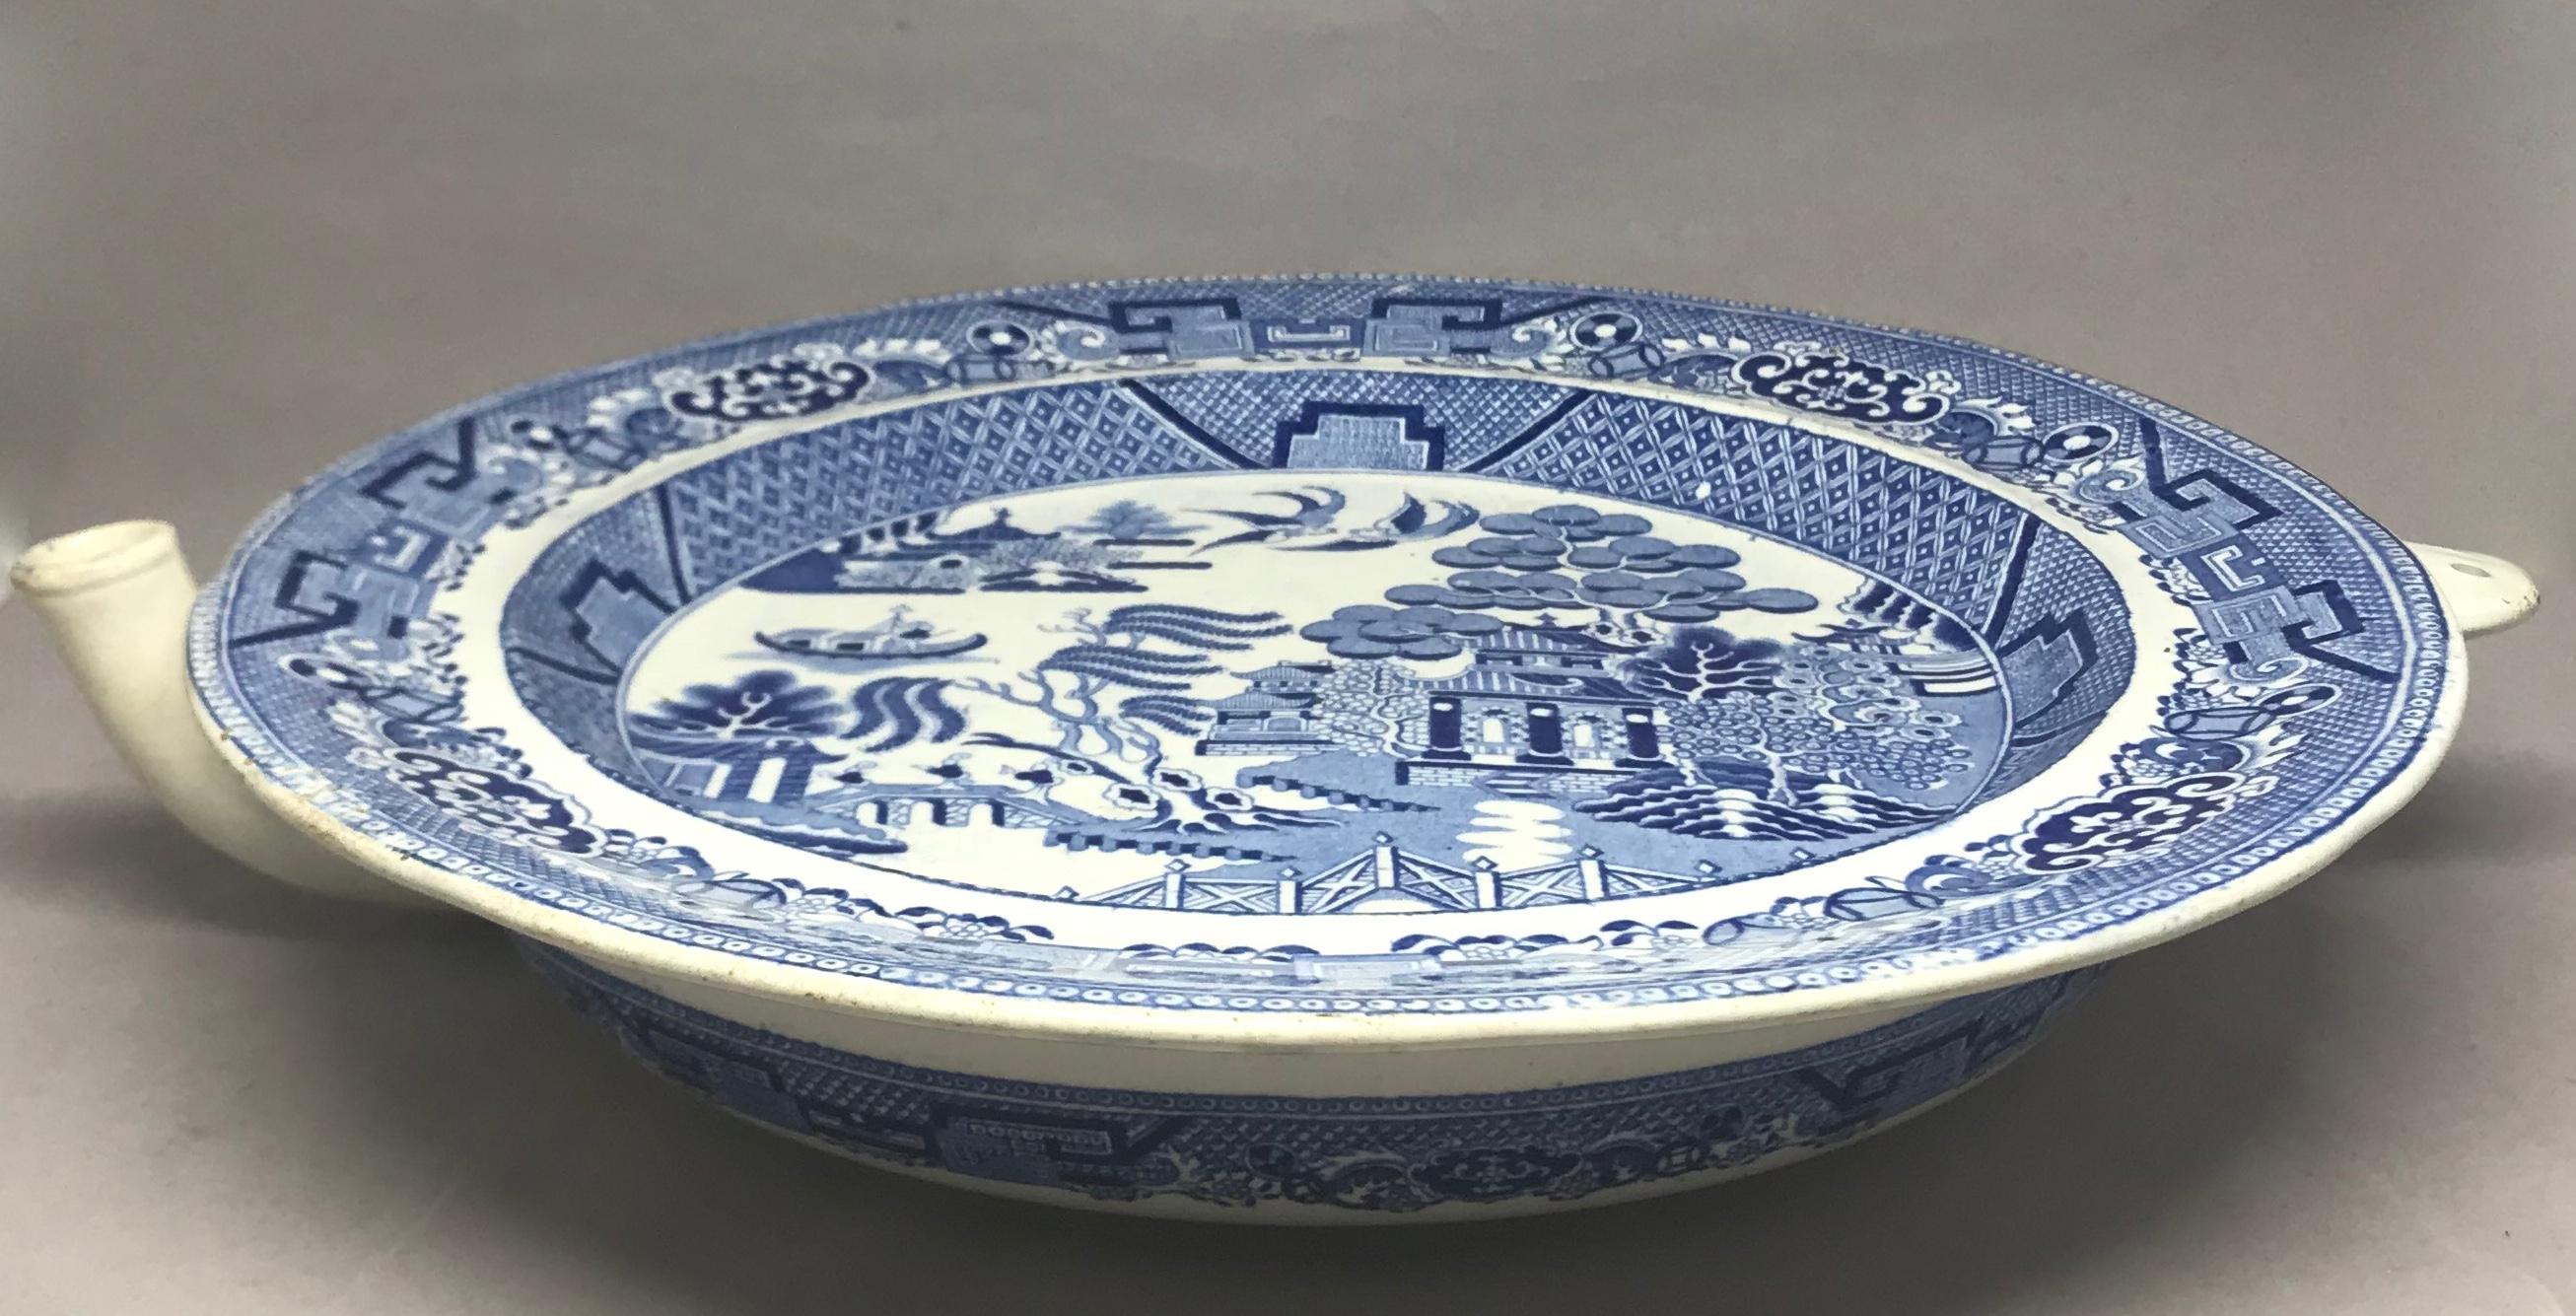 blue willow dishes